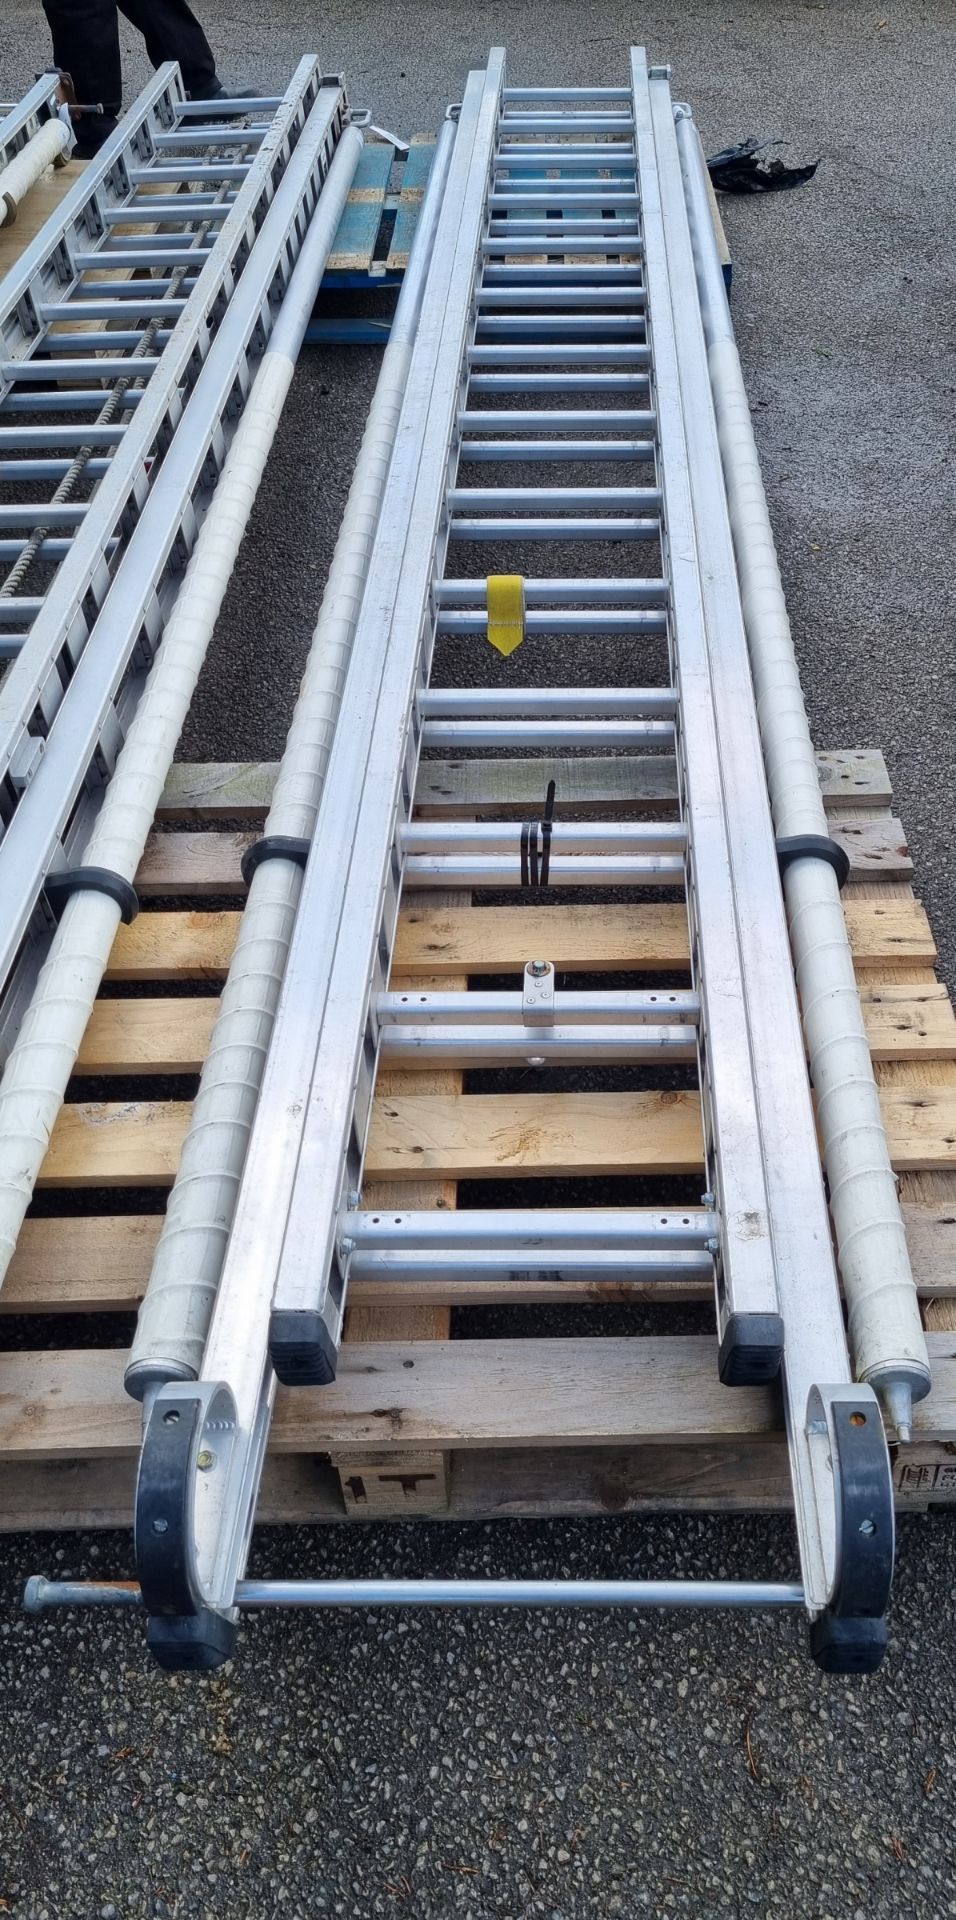 AS Fire & Rescue equipment ladder - 2 section - 14 rungs per section with side supports - approx 4M - Image 3 of 3